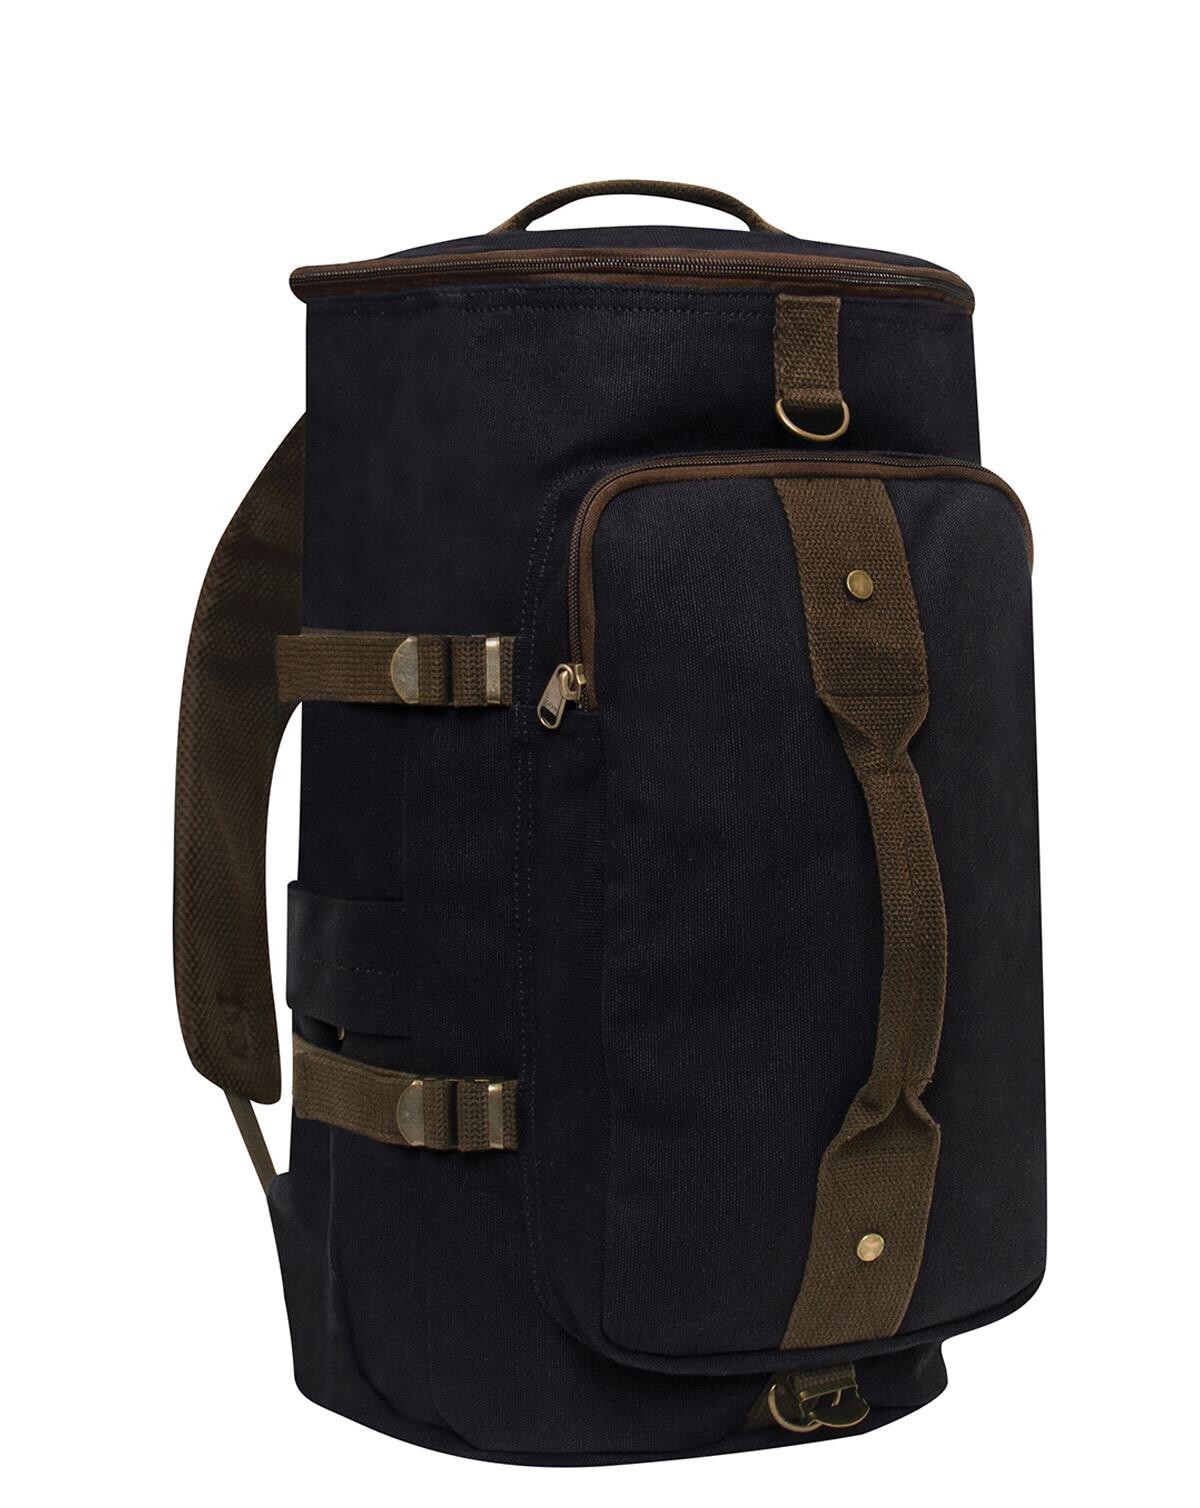 Rothco Convertible Canvas Duffle / Backpack (Sort, One Size)